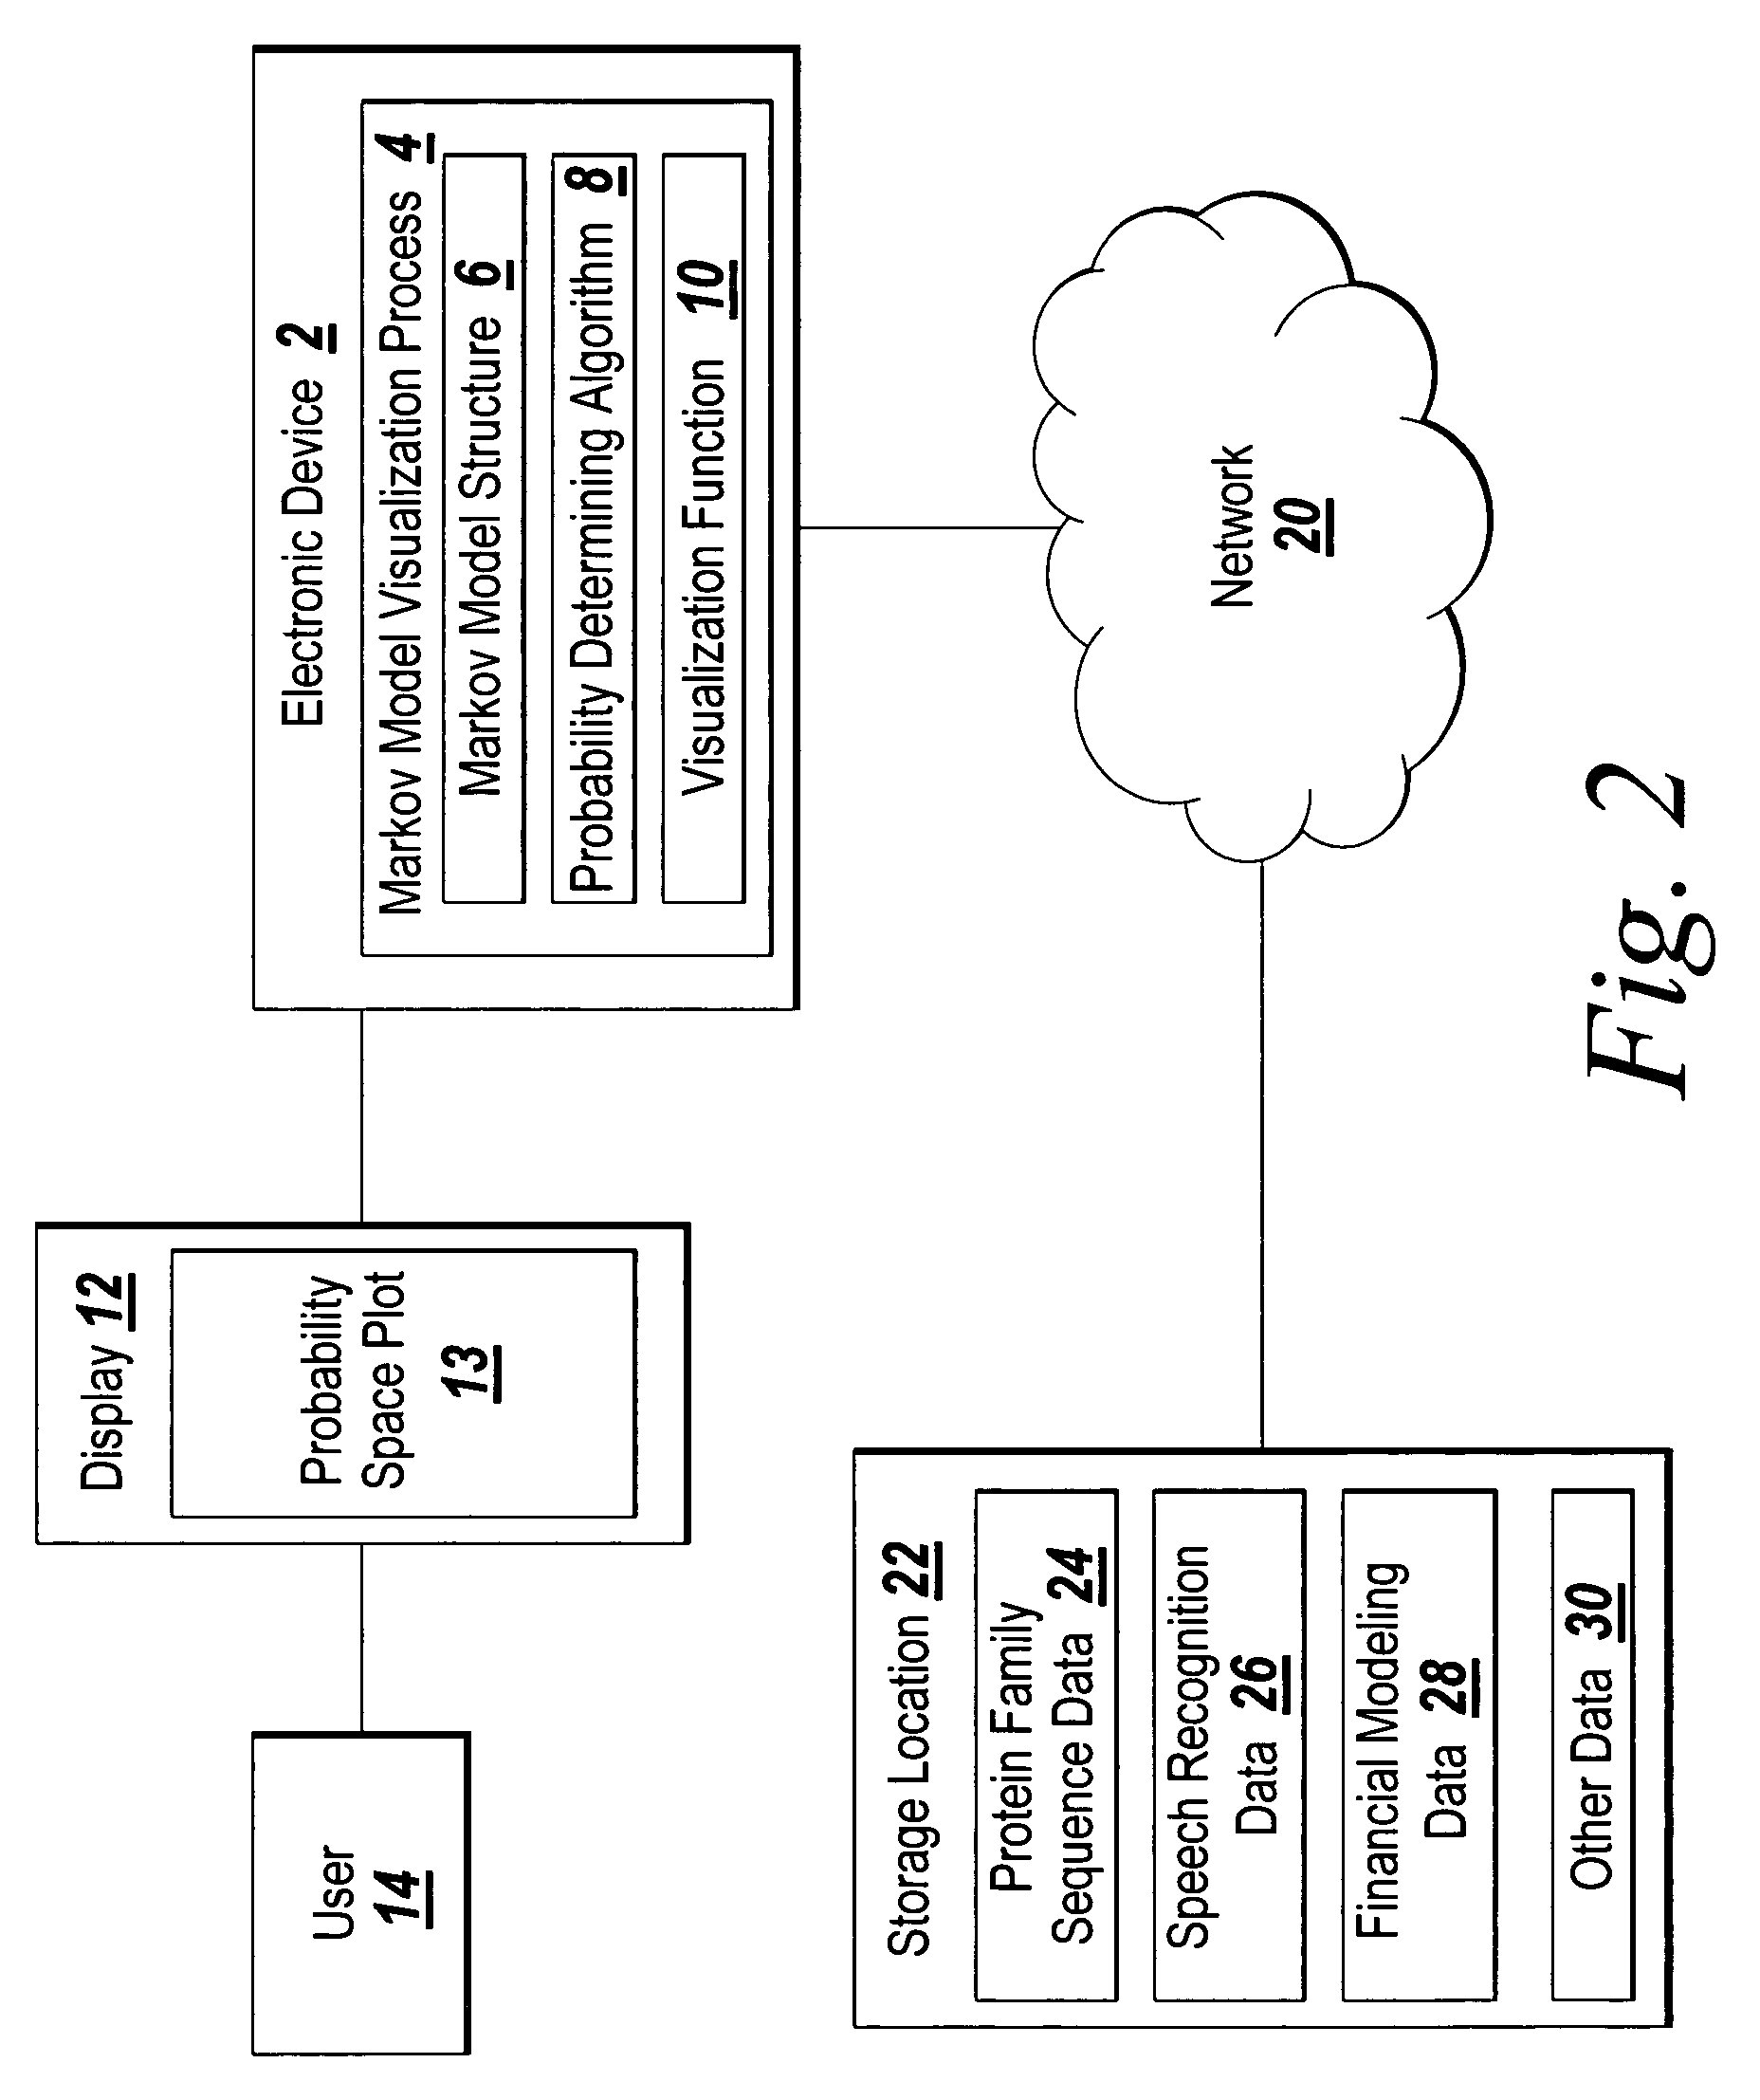 System and method for visualizing repetitively structured Markov models